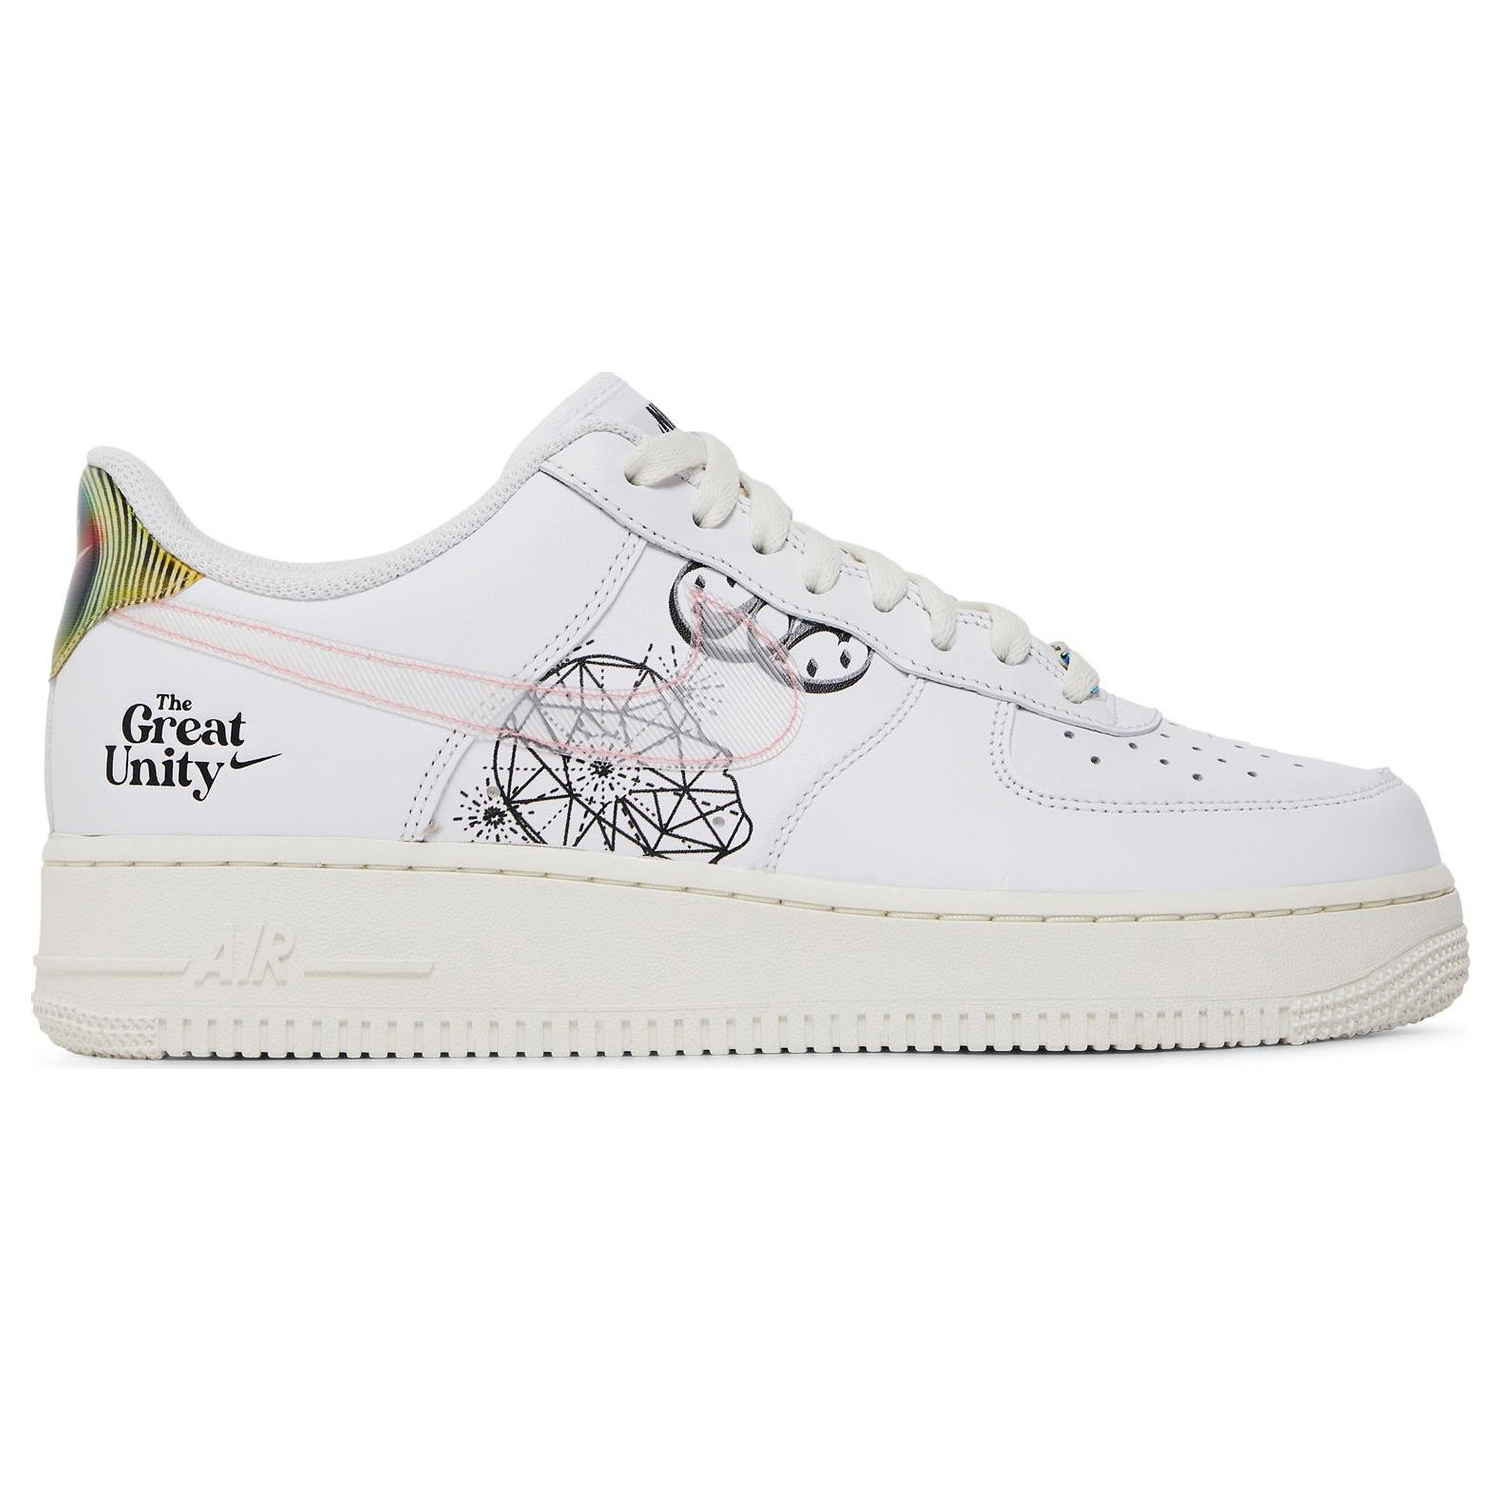 Кроссовки Nike Air Force 1 Low 'The Great Unity', белый